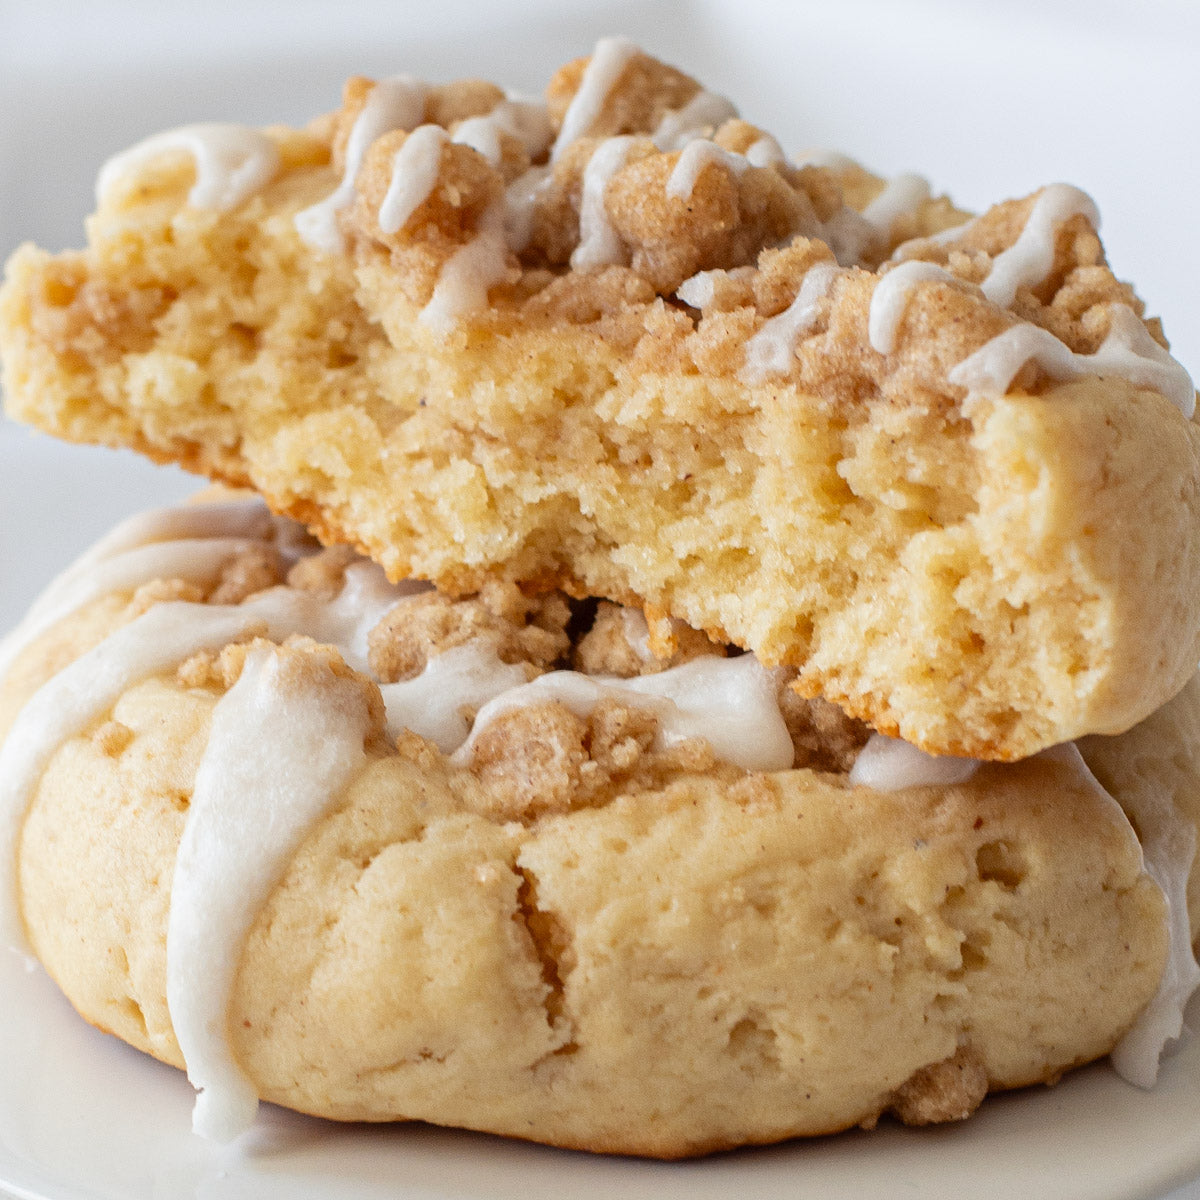 Overhead view of a Crumb Cake Cookie with a crumbly streusel topping and a vanilla glaze drizzle on a white plate.